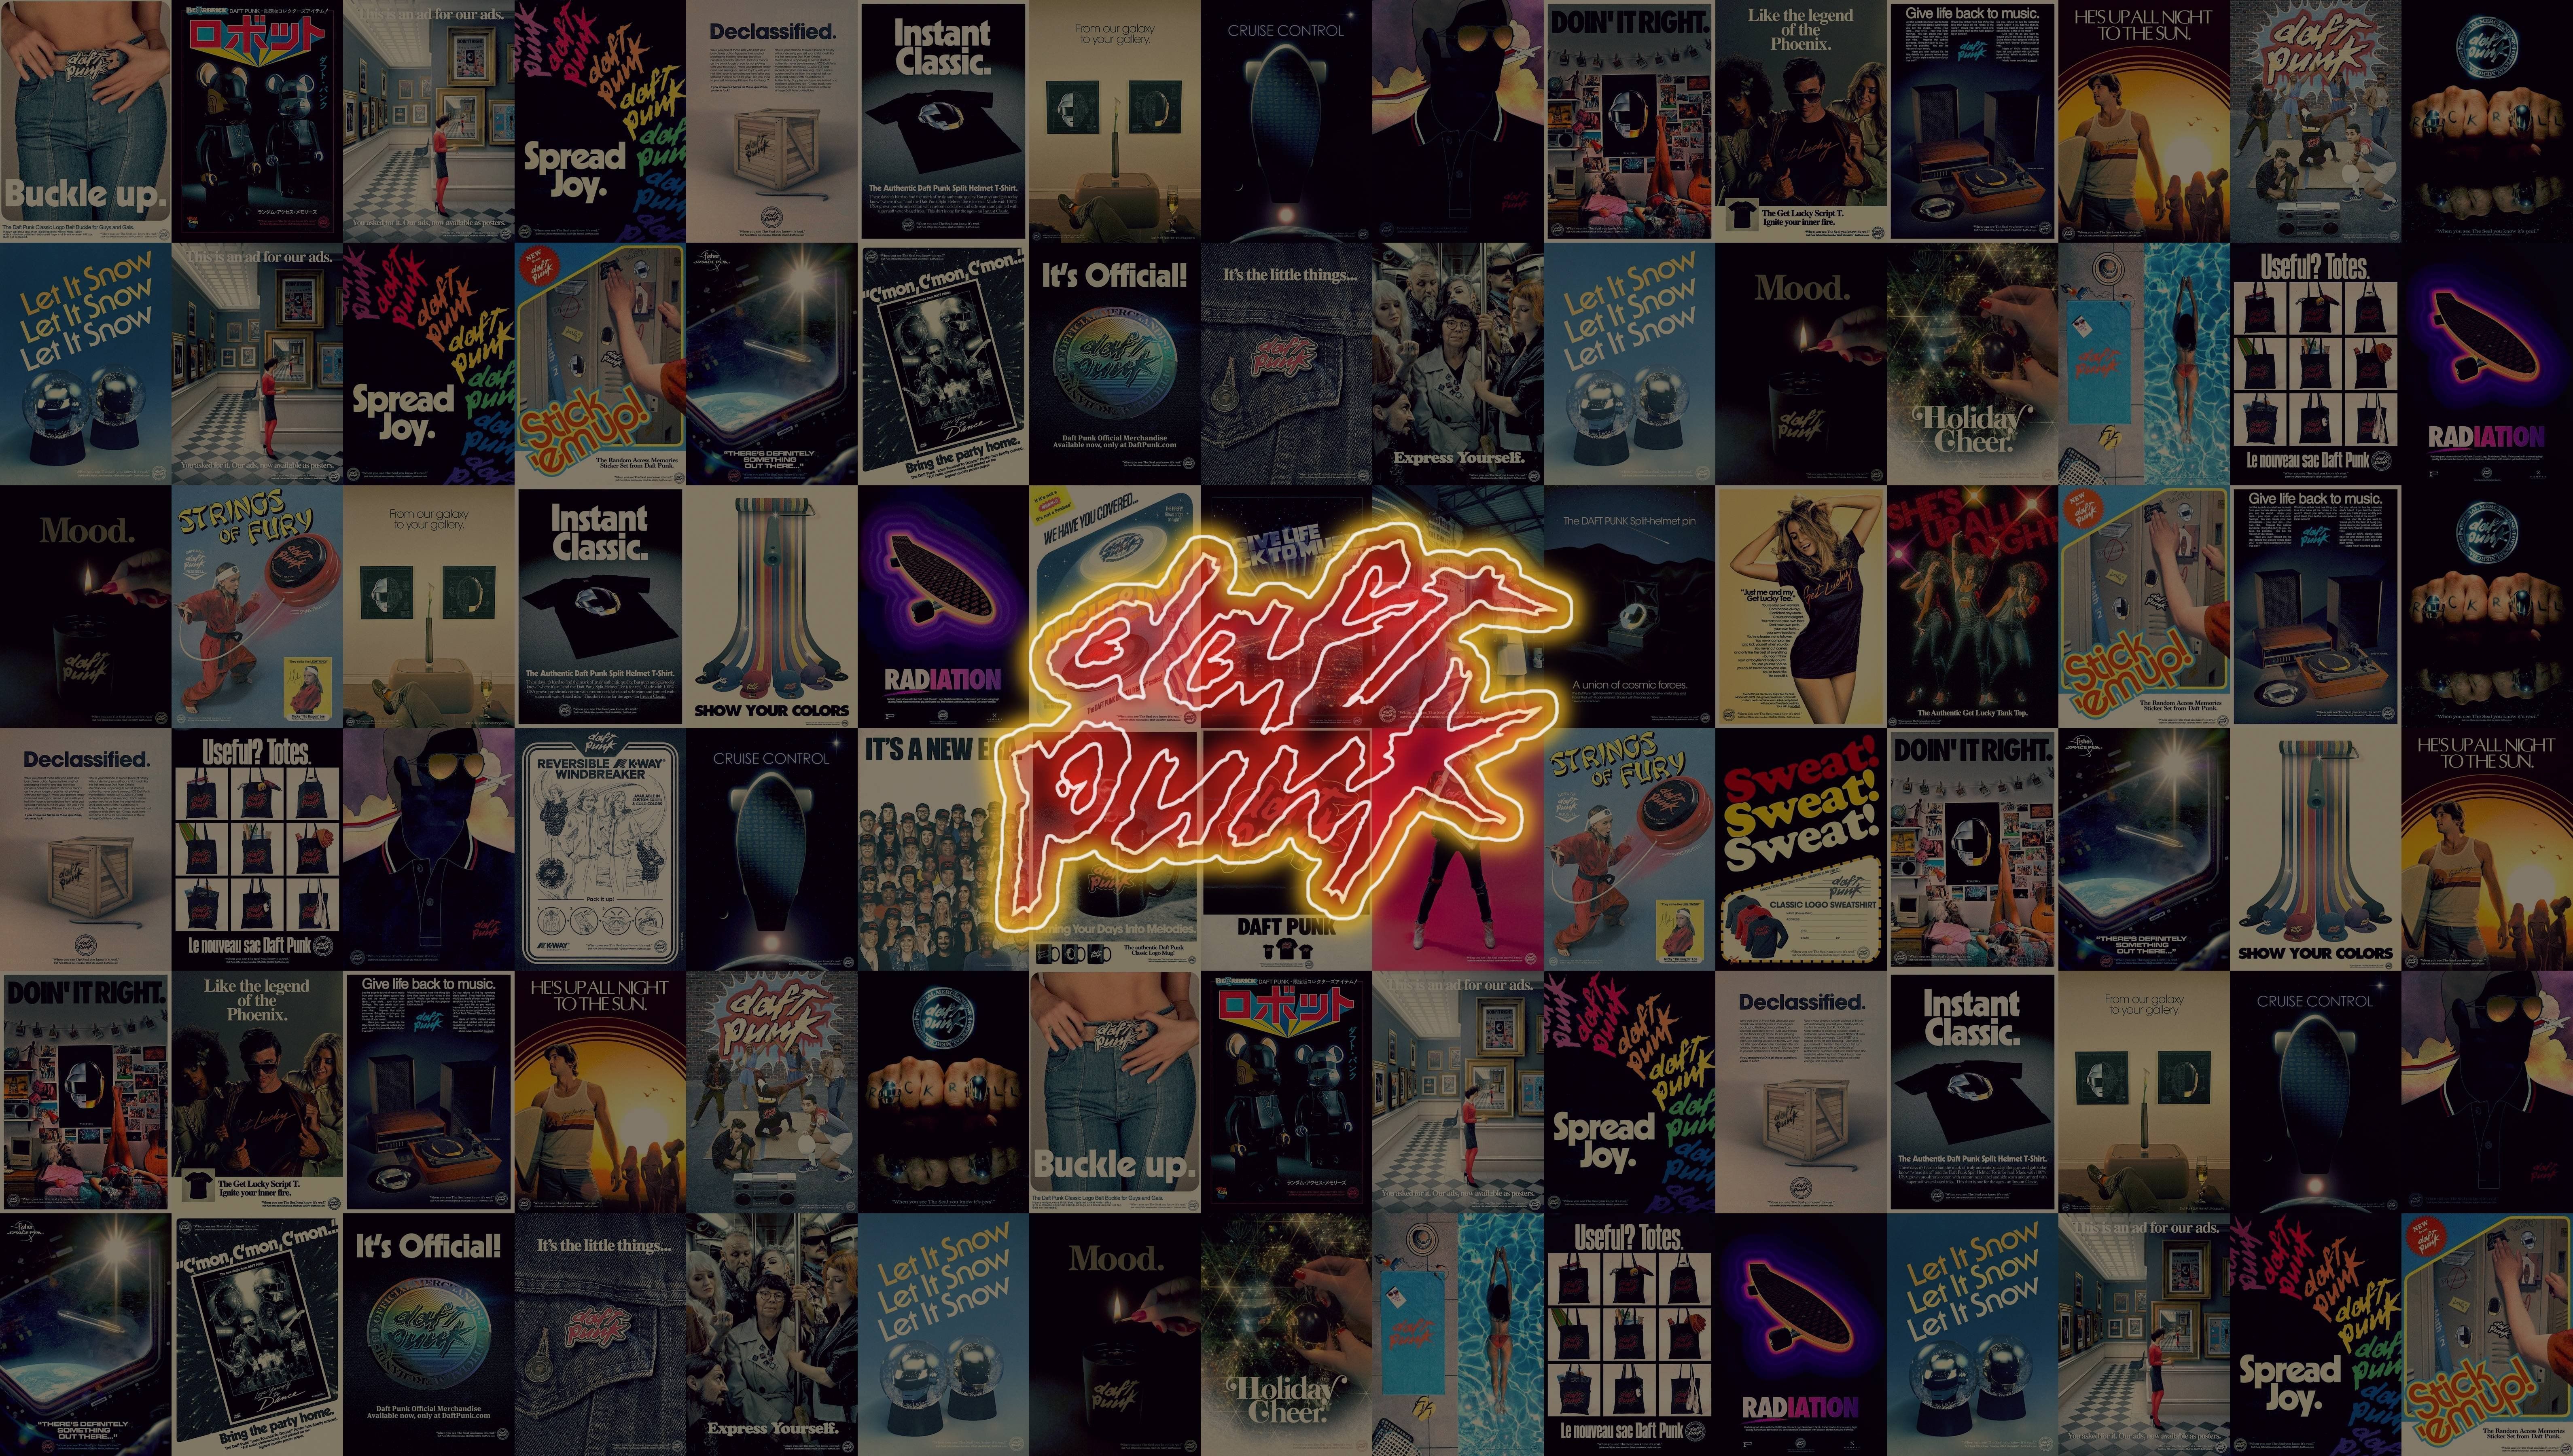 A collage of movie posters with neon lettering - Punk